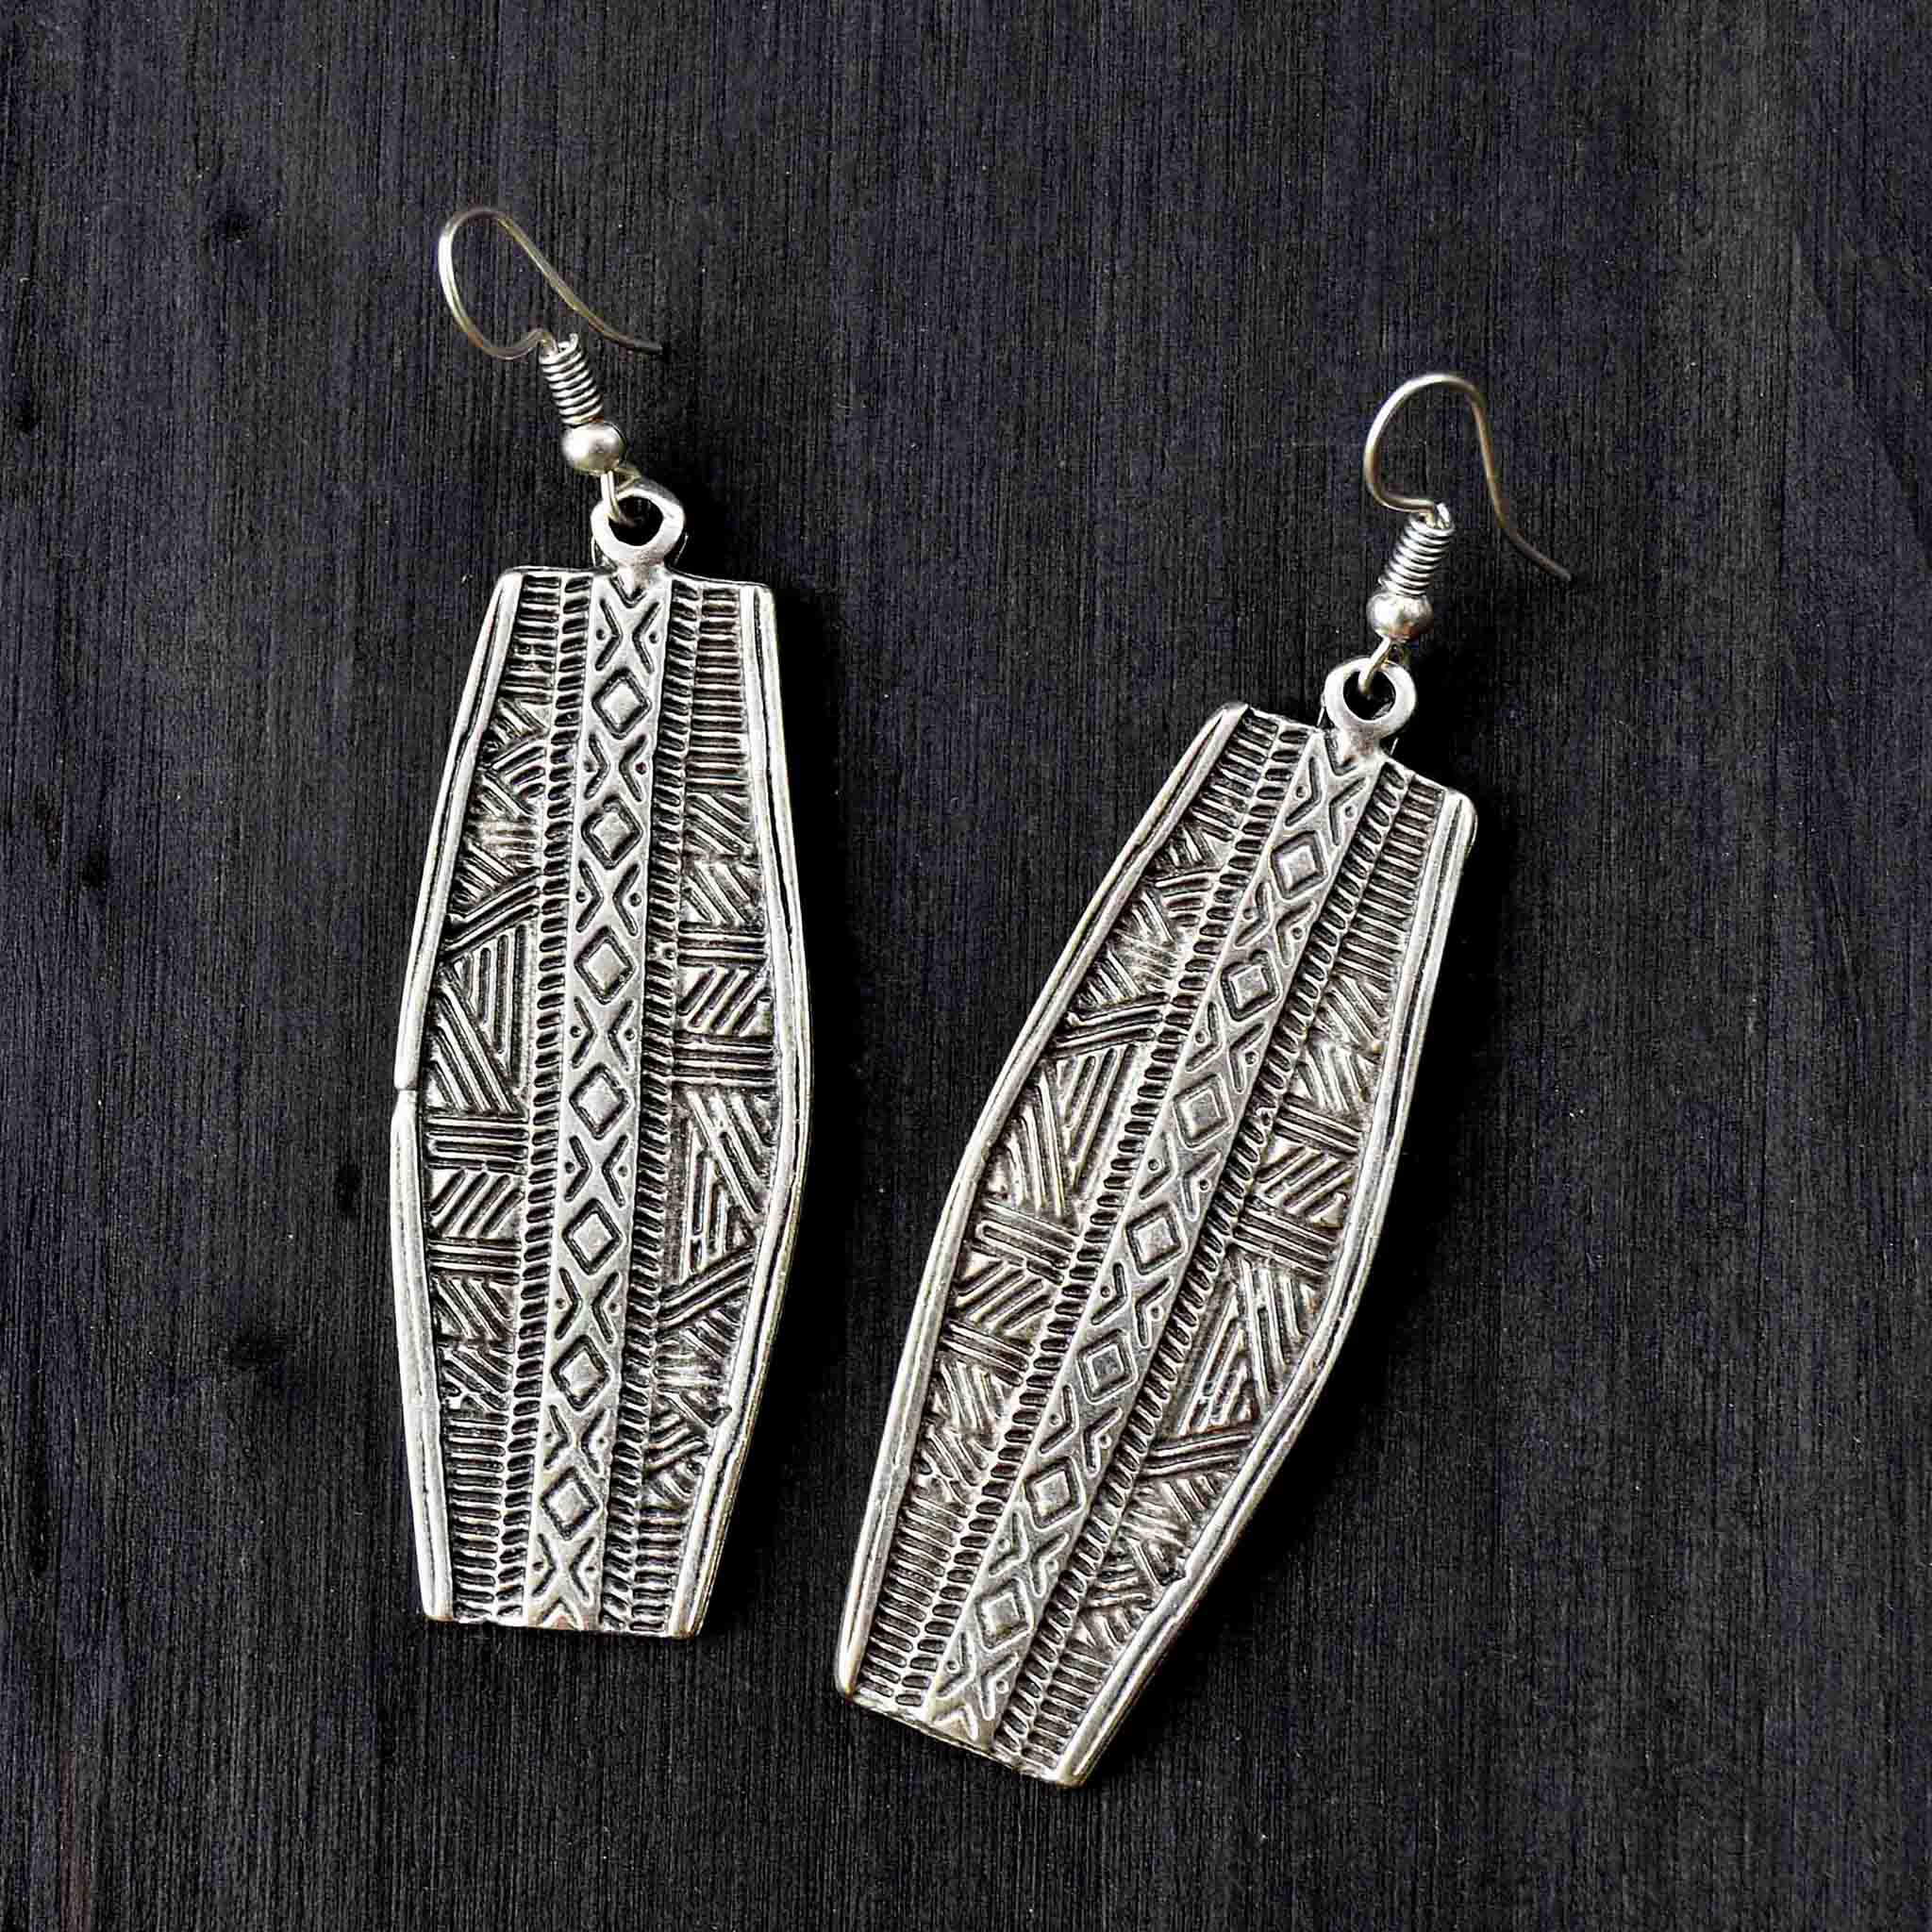 Long african earrings with engraved geometric motifs